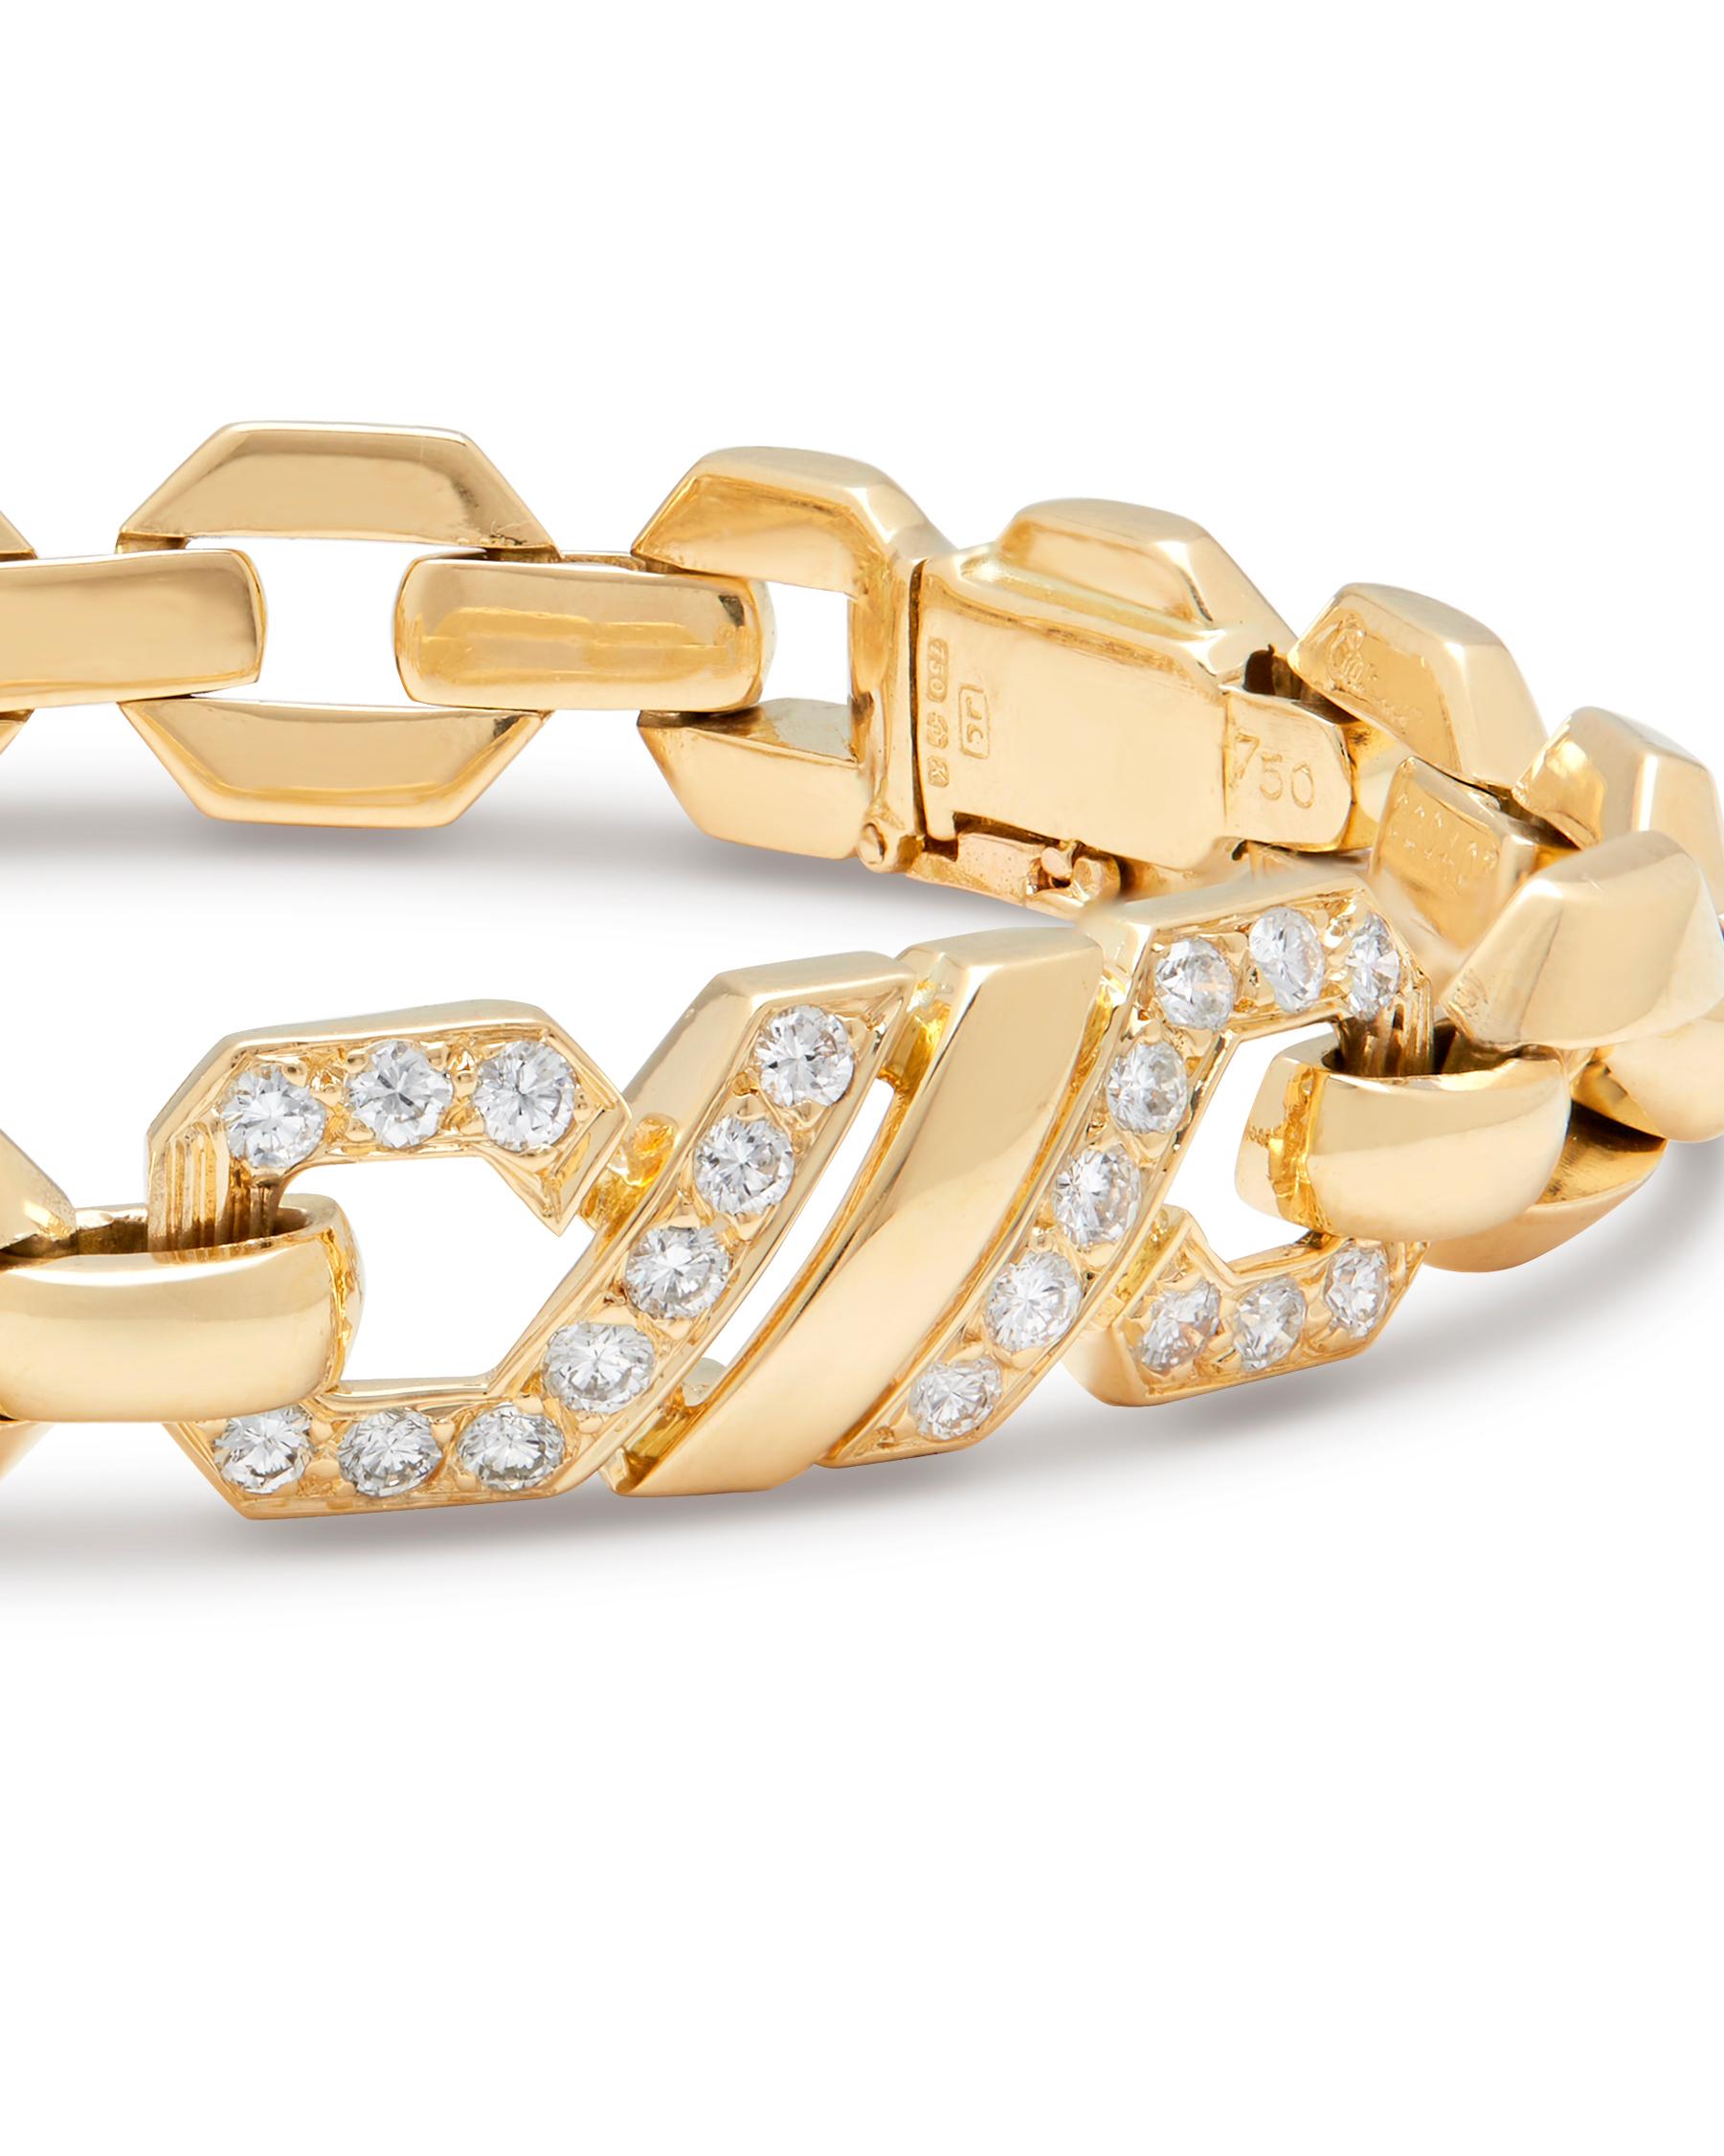 18k Yellow Gold Foxtrot Diamond Bracelet by Cartier Paris 1984 

This stylist piece never goes out of fashion, a real Cartier collectors piece for any deserving buyers.

Set with 40 round brilliant cut diamonds VVS1 clarity, E,F Colour total diamond